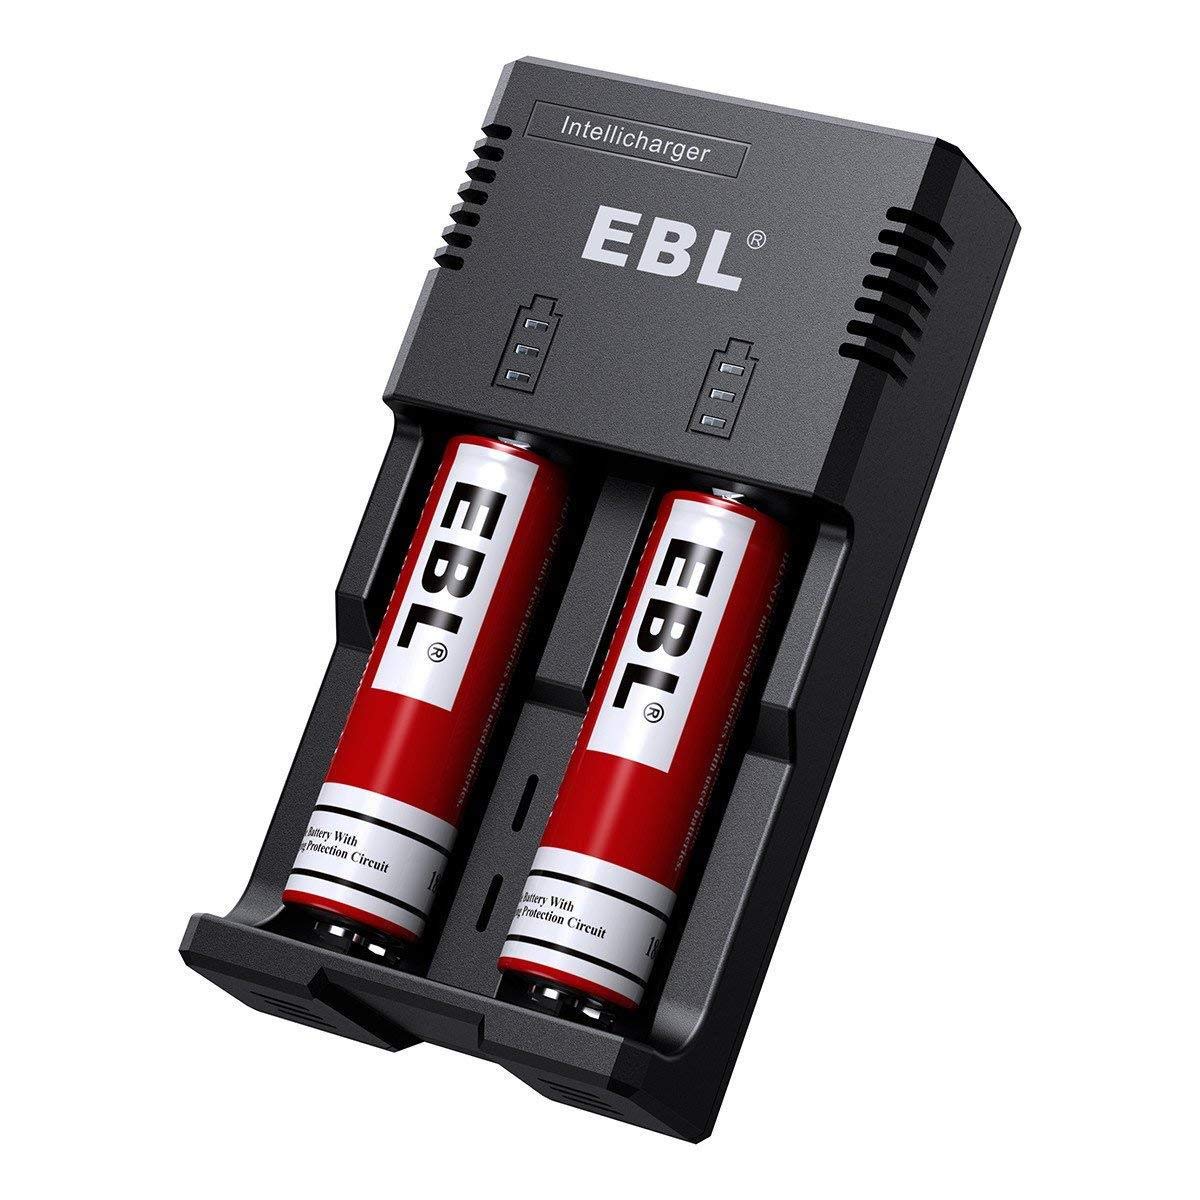 EBL 992 iQuick Intellicharger For 18650 26650 22650 17670 18490 16340 RCR123 14500 10440 Li-ion cylindrical and AA AAA C Ni-MH Ni-CD Rechargeable Batteries